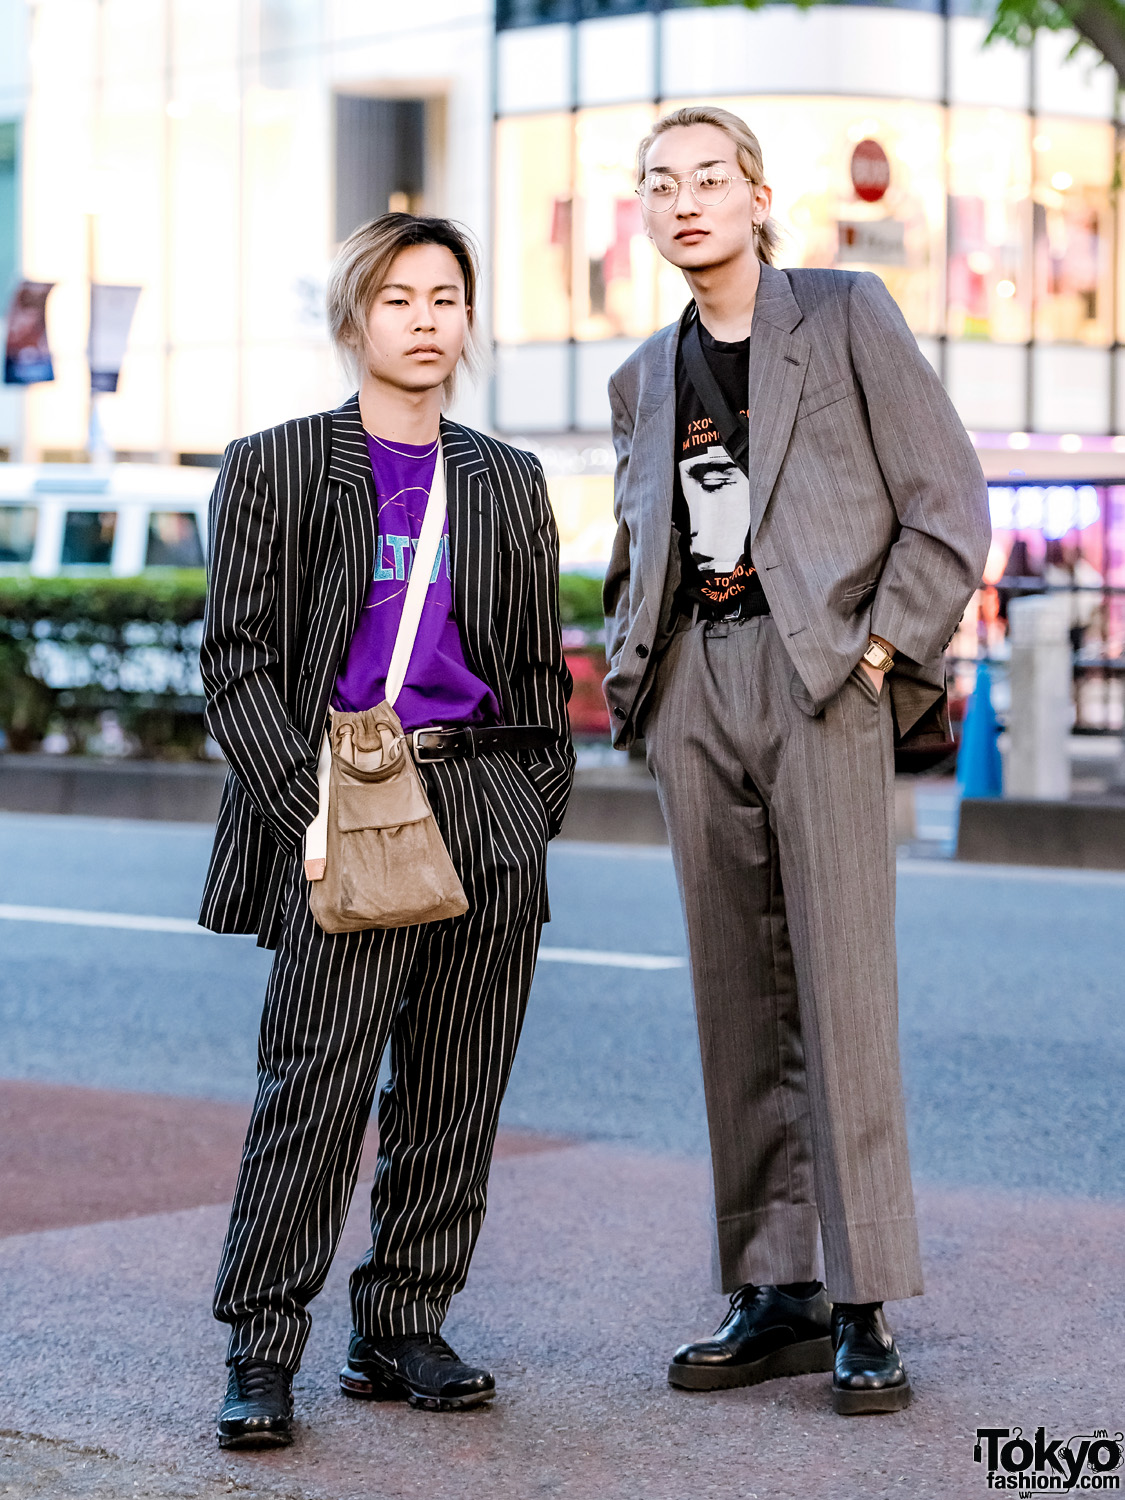 Harajuku Menswear Suit Styles w/ Christian Dior, Little Big, Punta, TTT_MSW, Nike, Hender Scheme & Another Youth